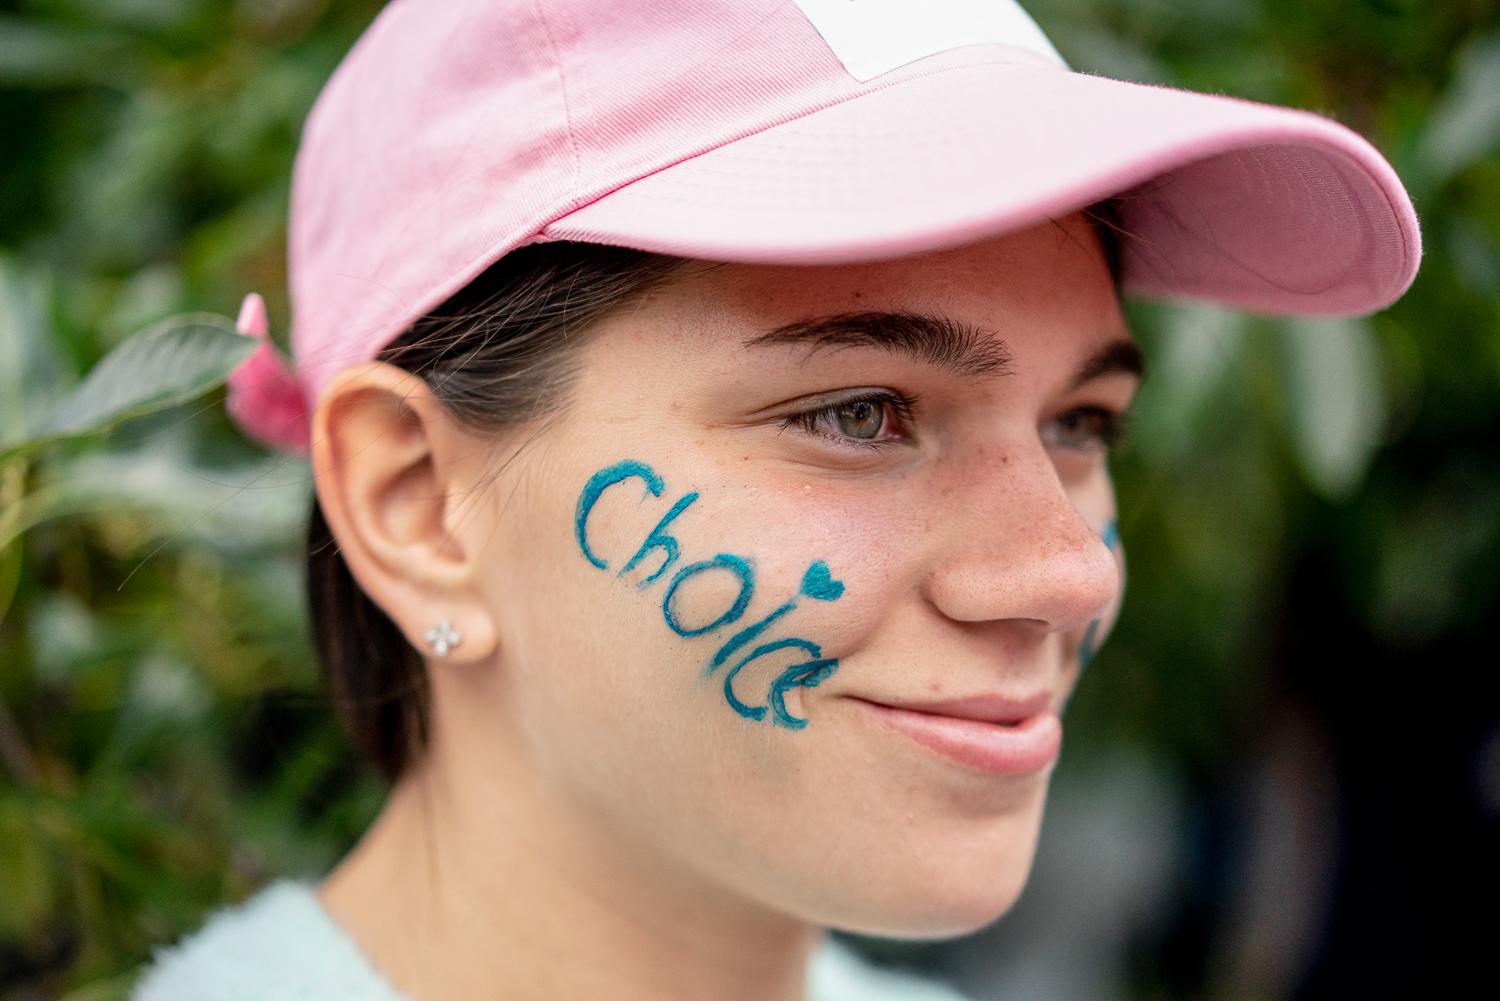 Roe v. Wade Protests - A demonstrator with the word “choice” on her...